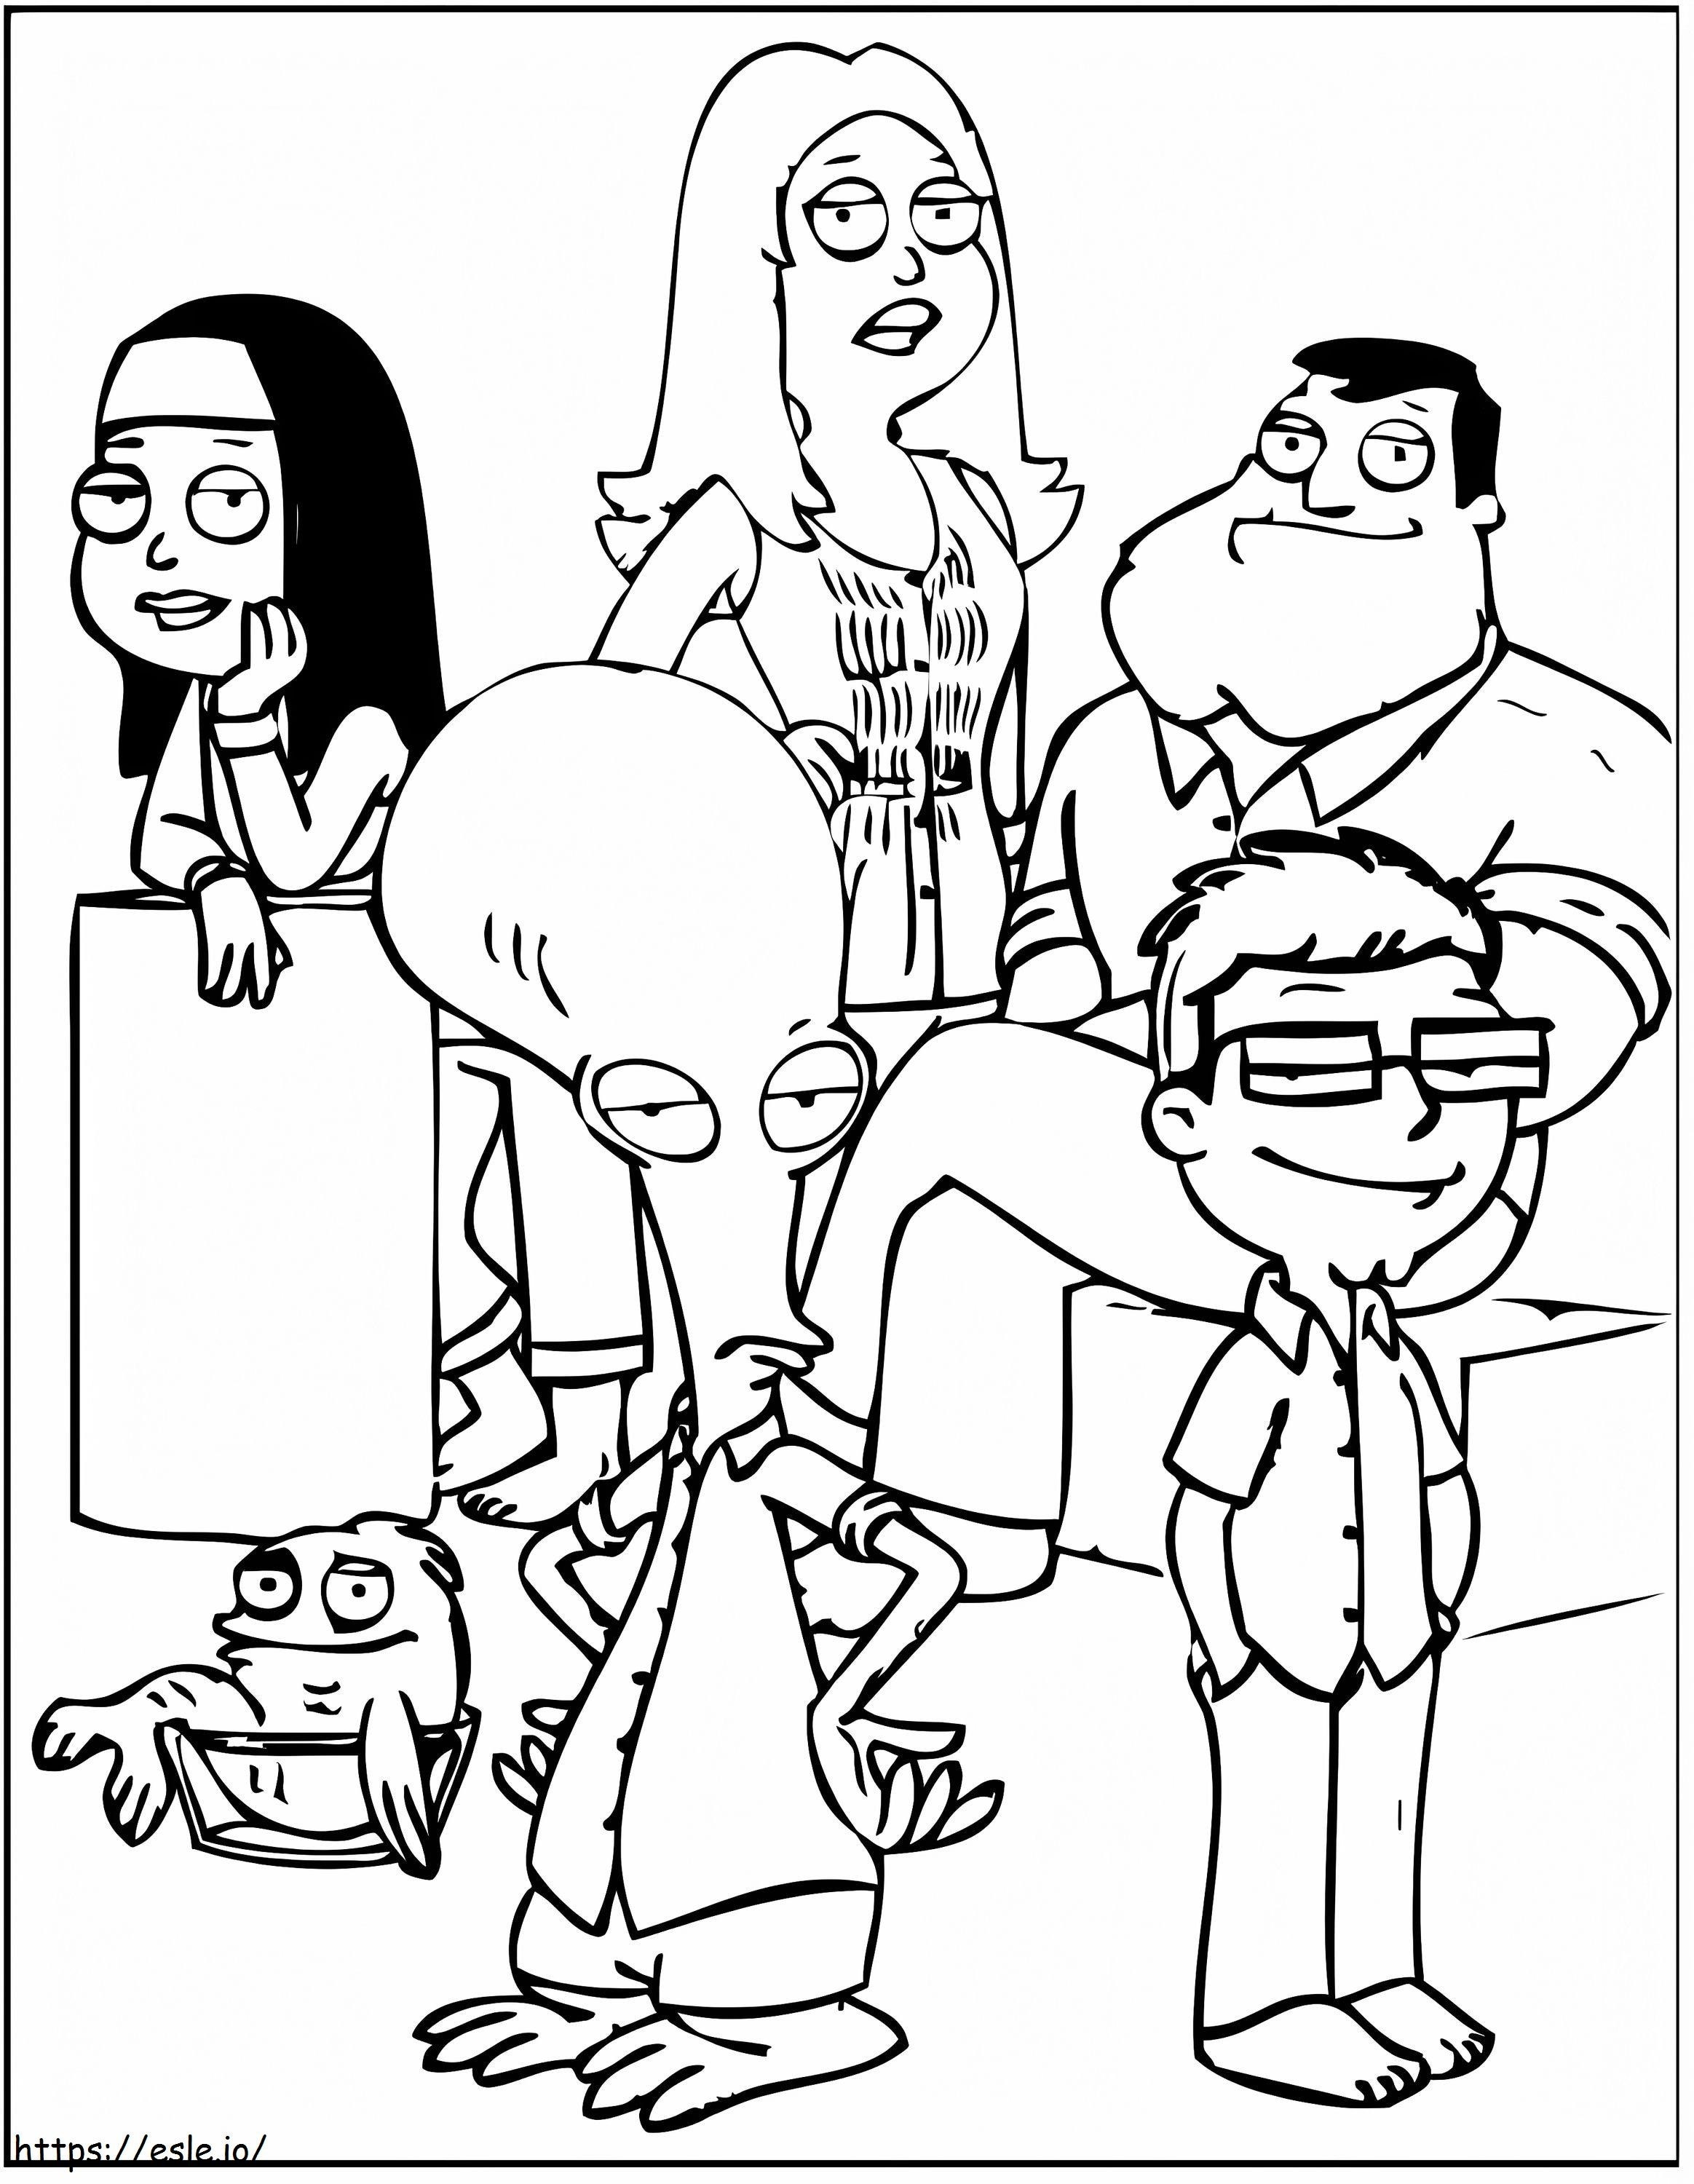 American Dad Characters coloring page